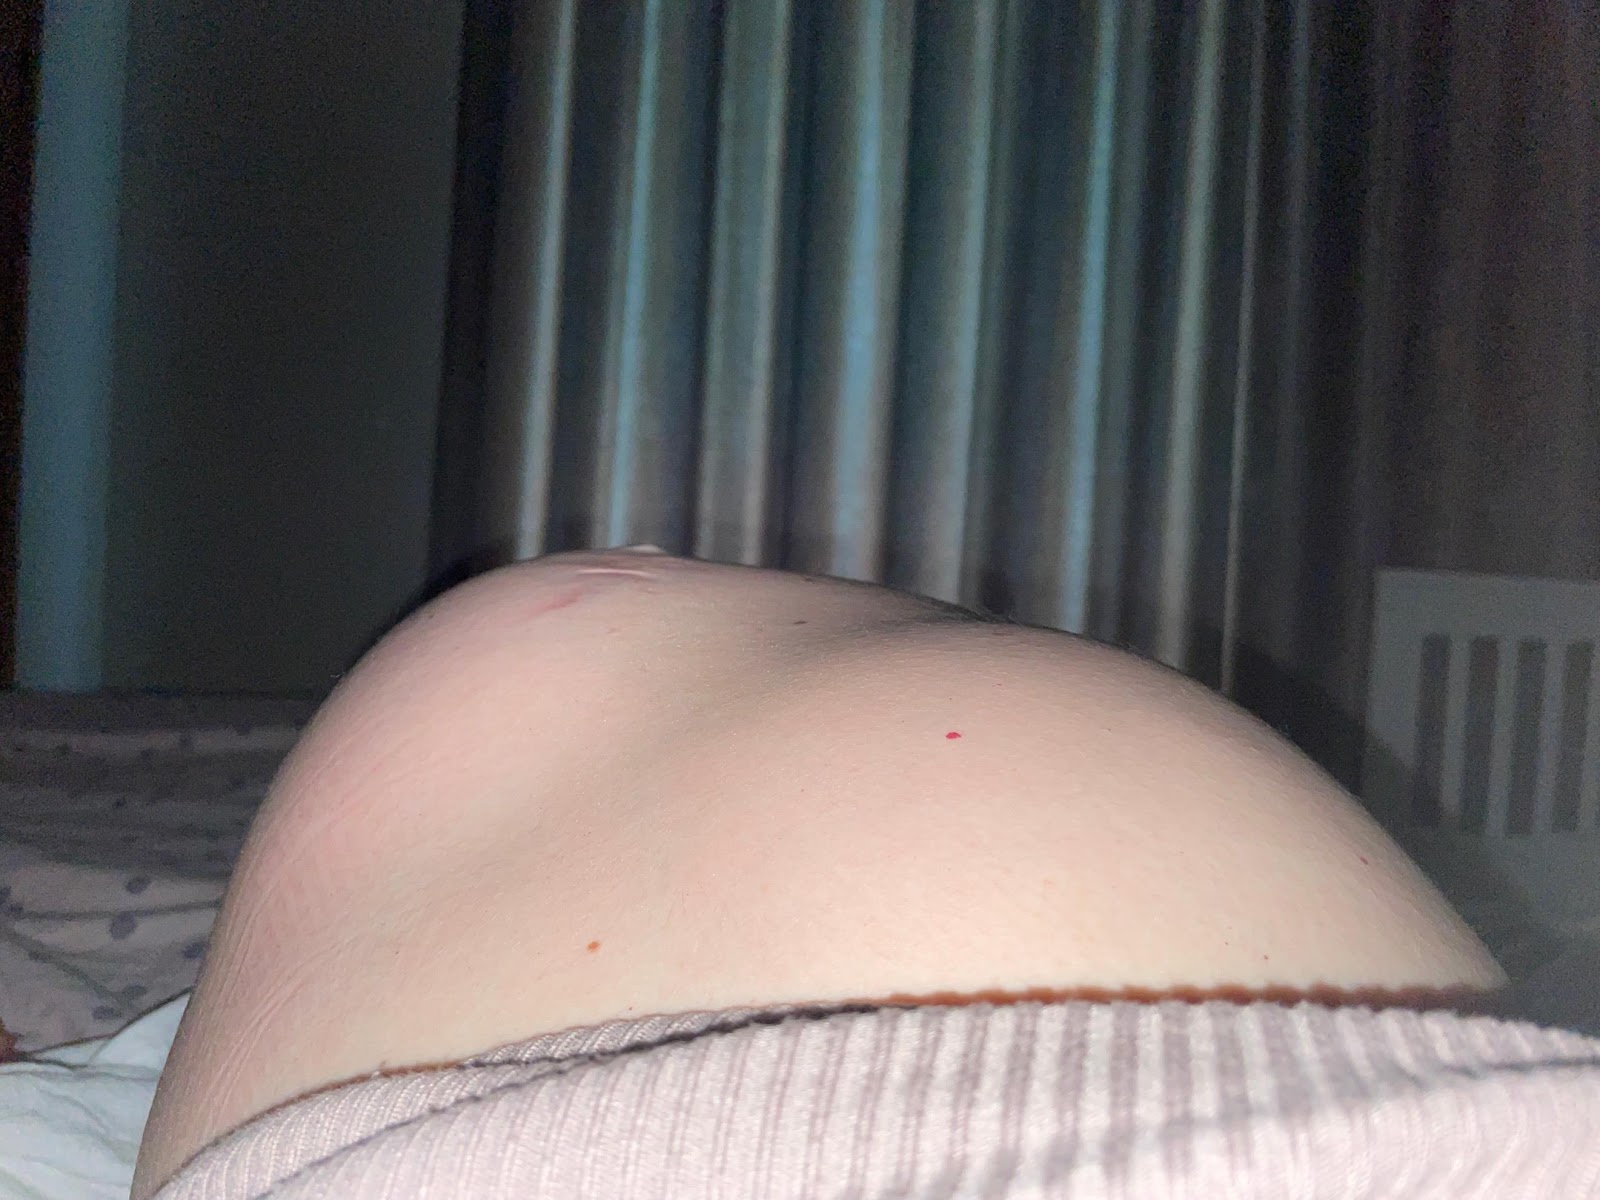 A close up of a pregnant person's belly

Description automatically generated